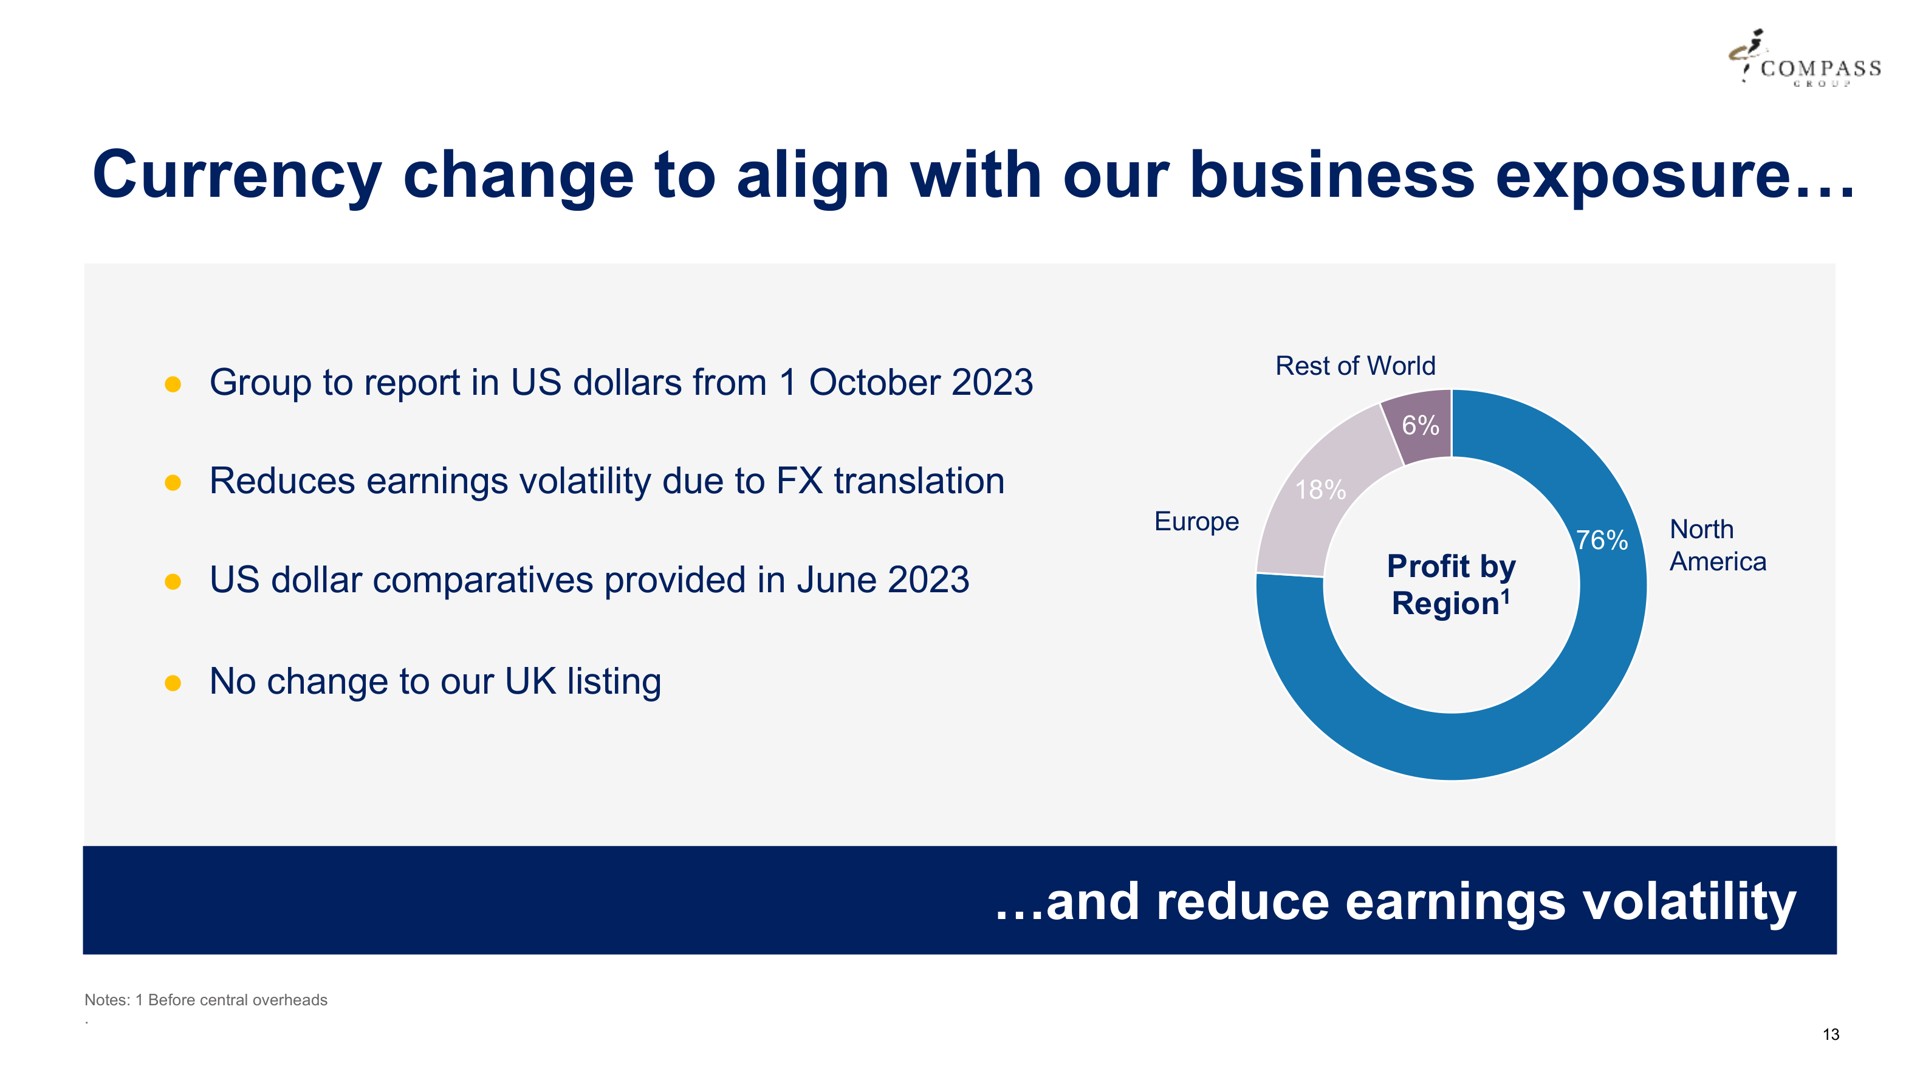 currency change to align with our business exposure compass group report in us dollars from reduces earnings volatility due translation us dollar comparatives provided in june no listing a pee and reduce earnings volatility | Compass Group